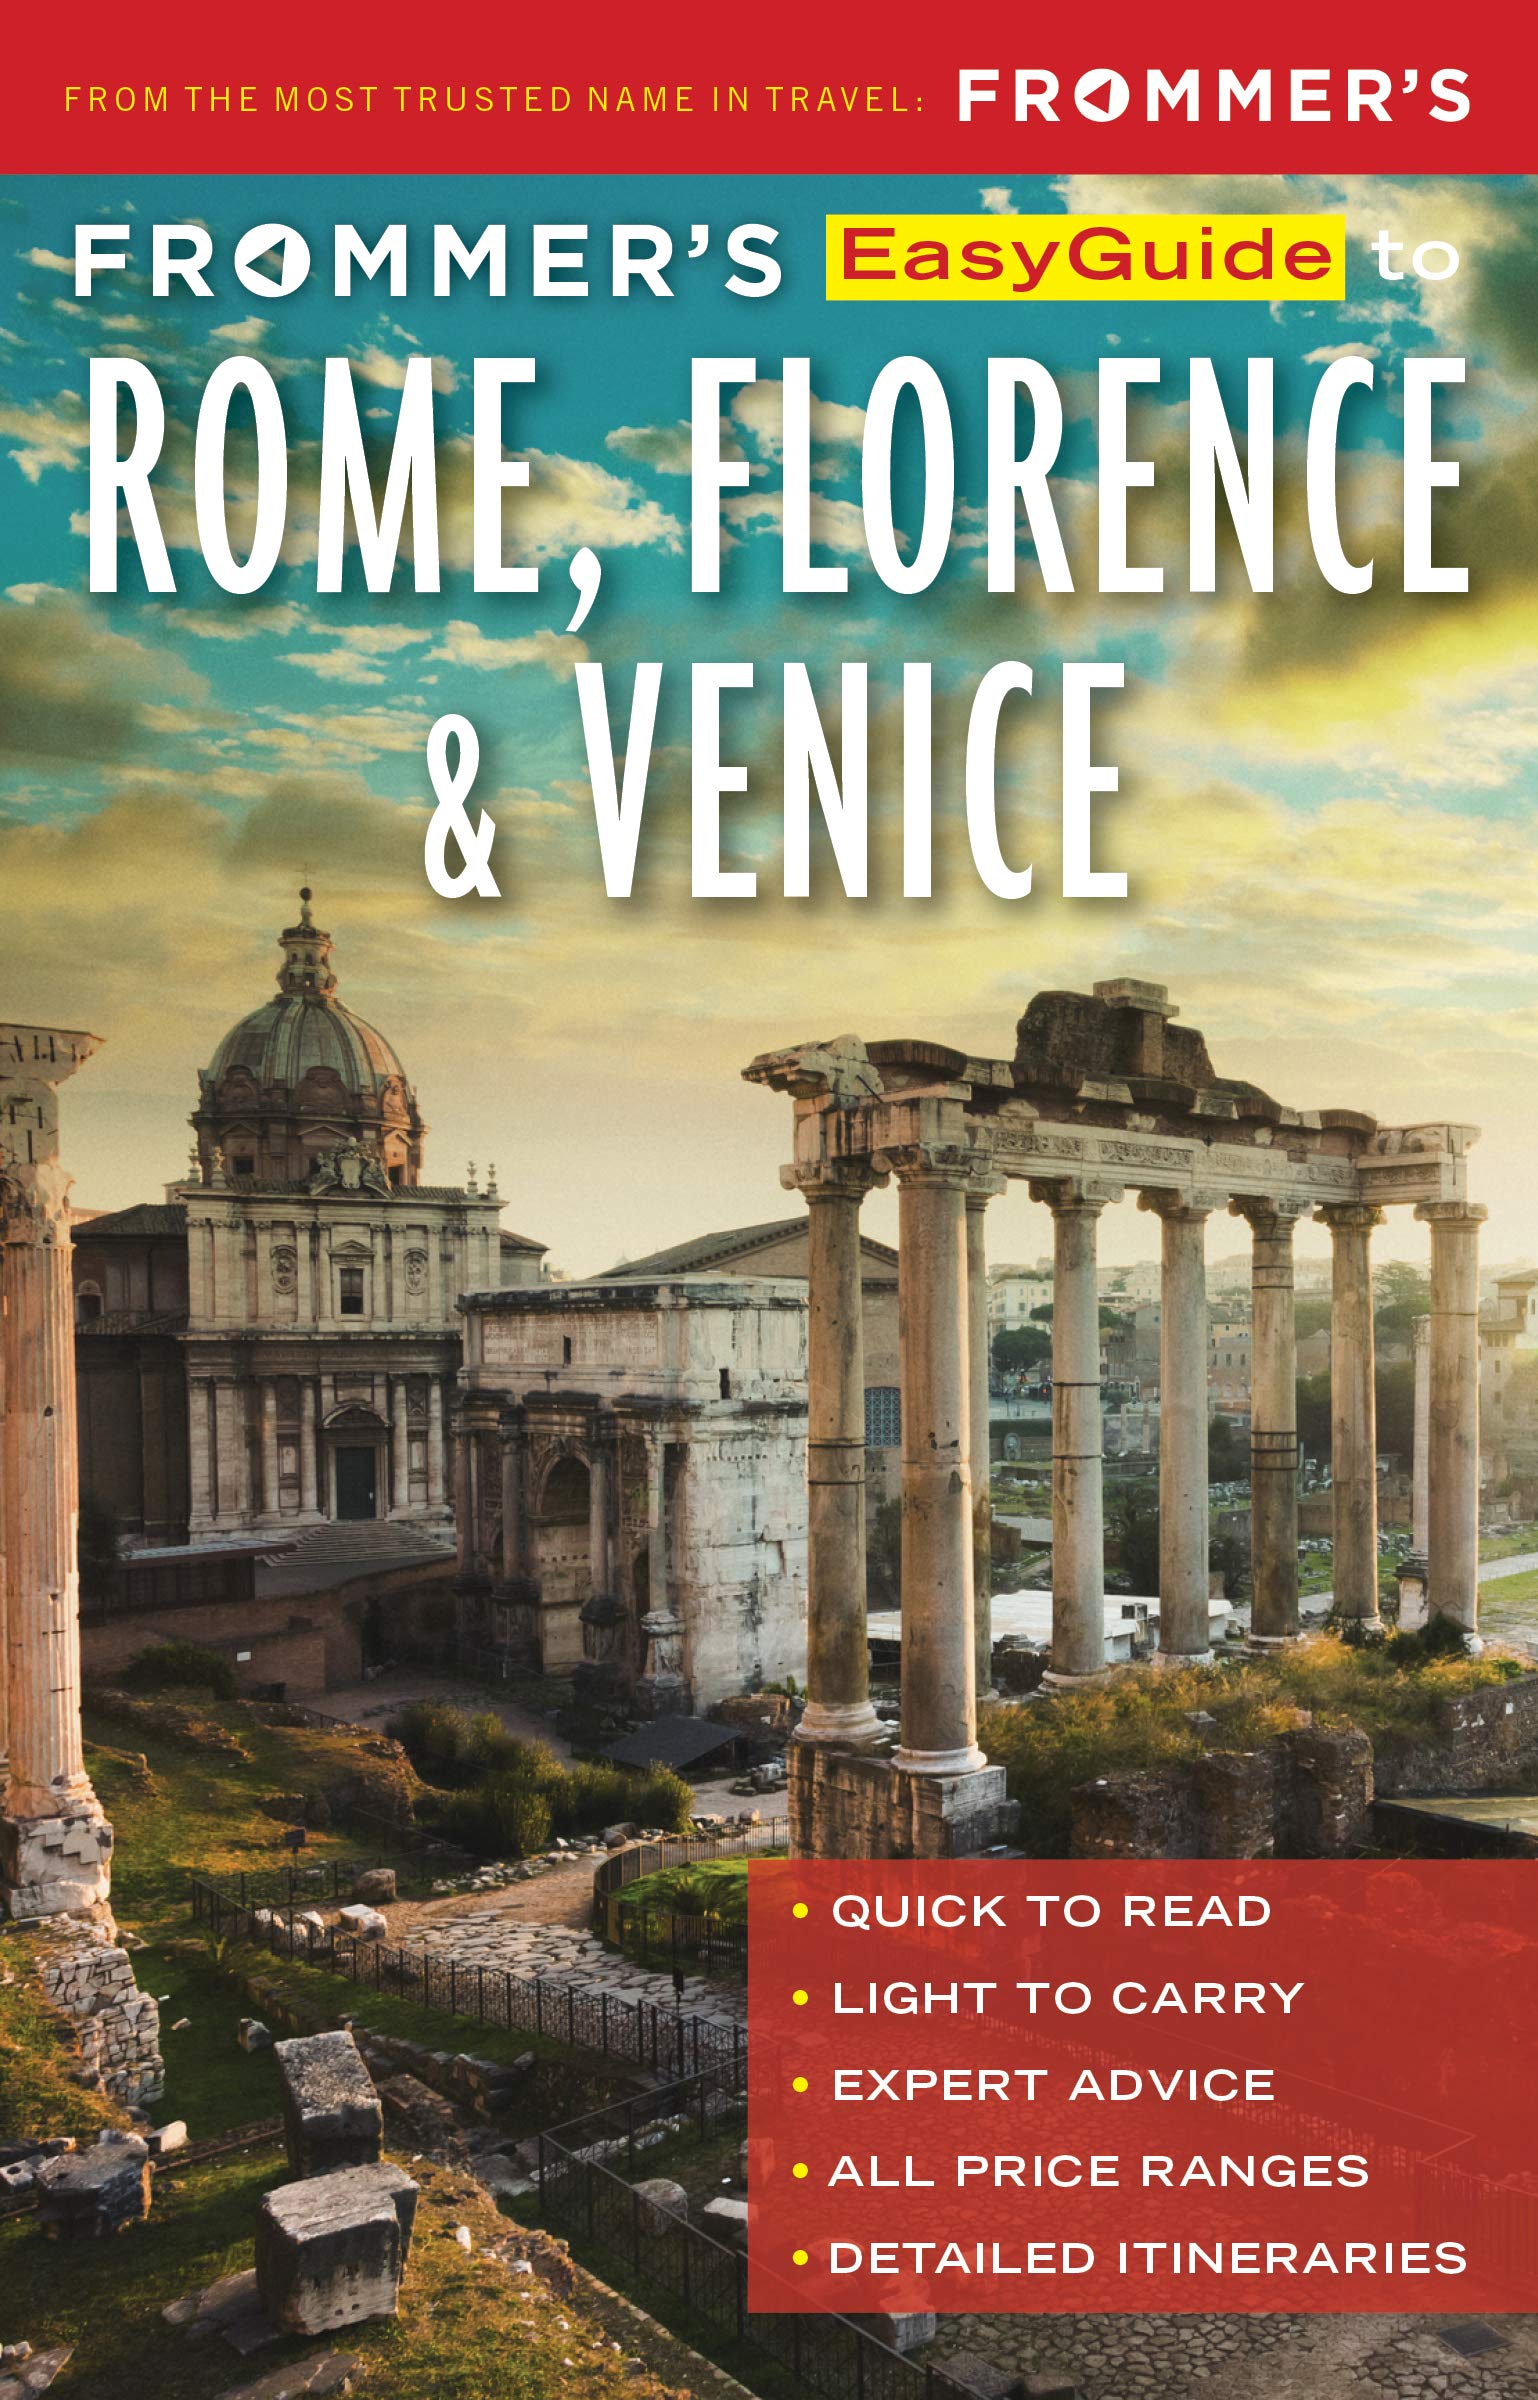 Frommer's Easy Guide Rome, Florence & Venice 8e